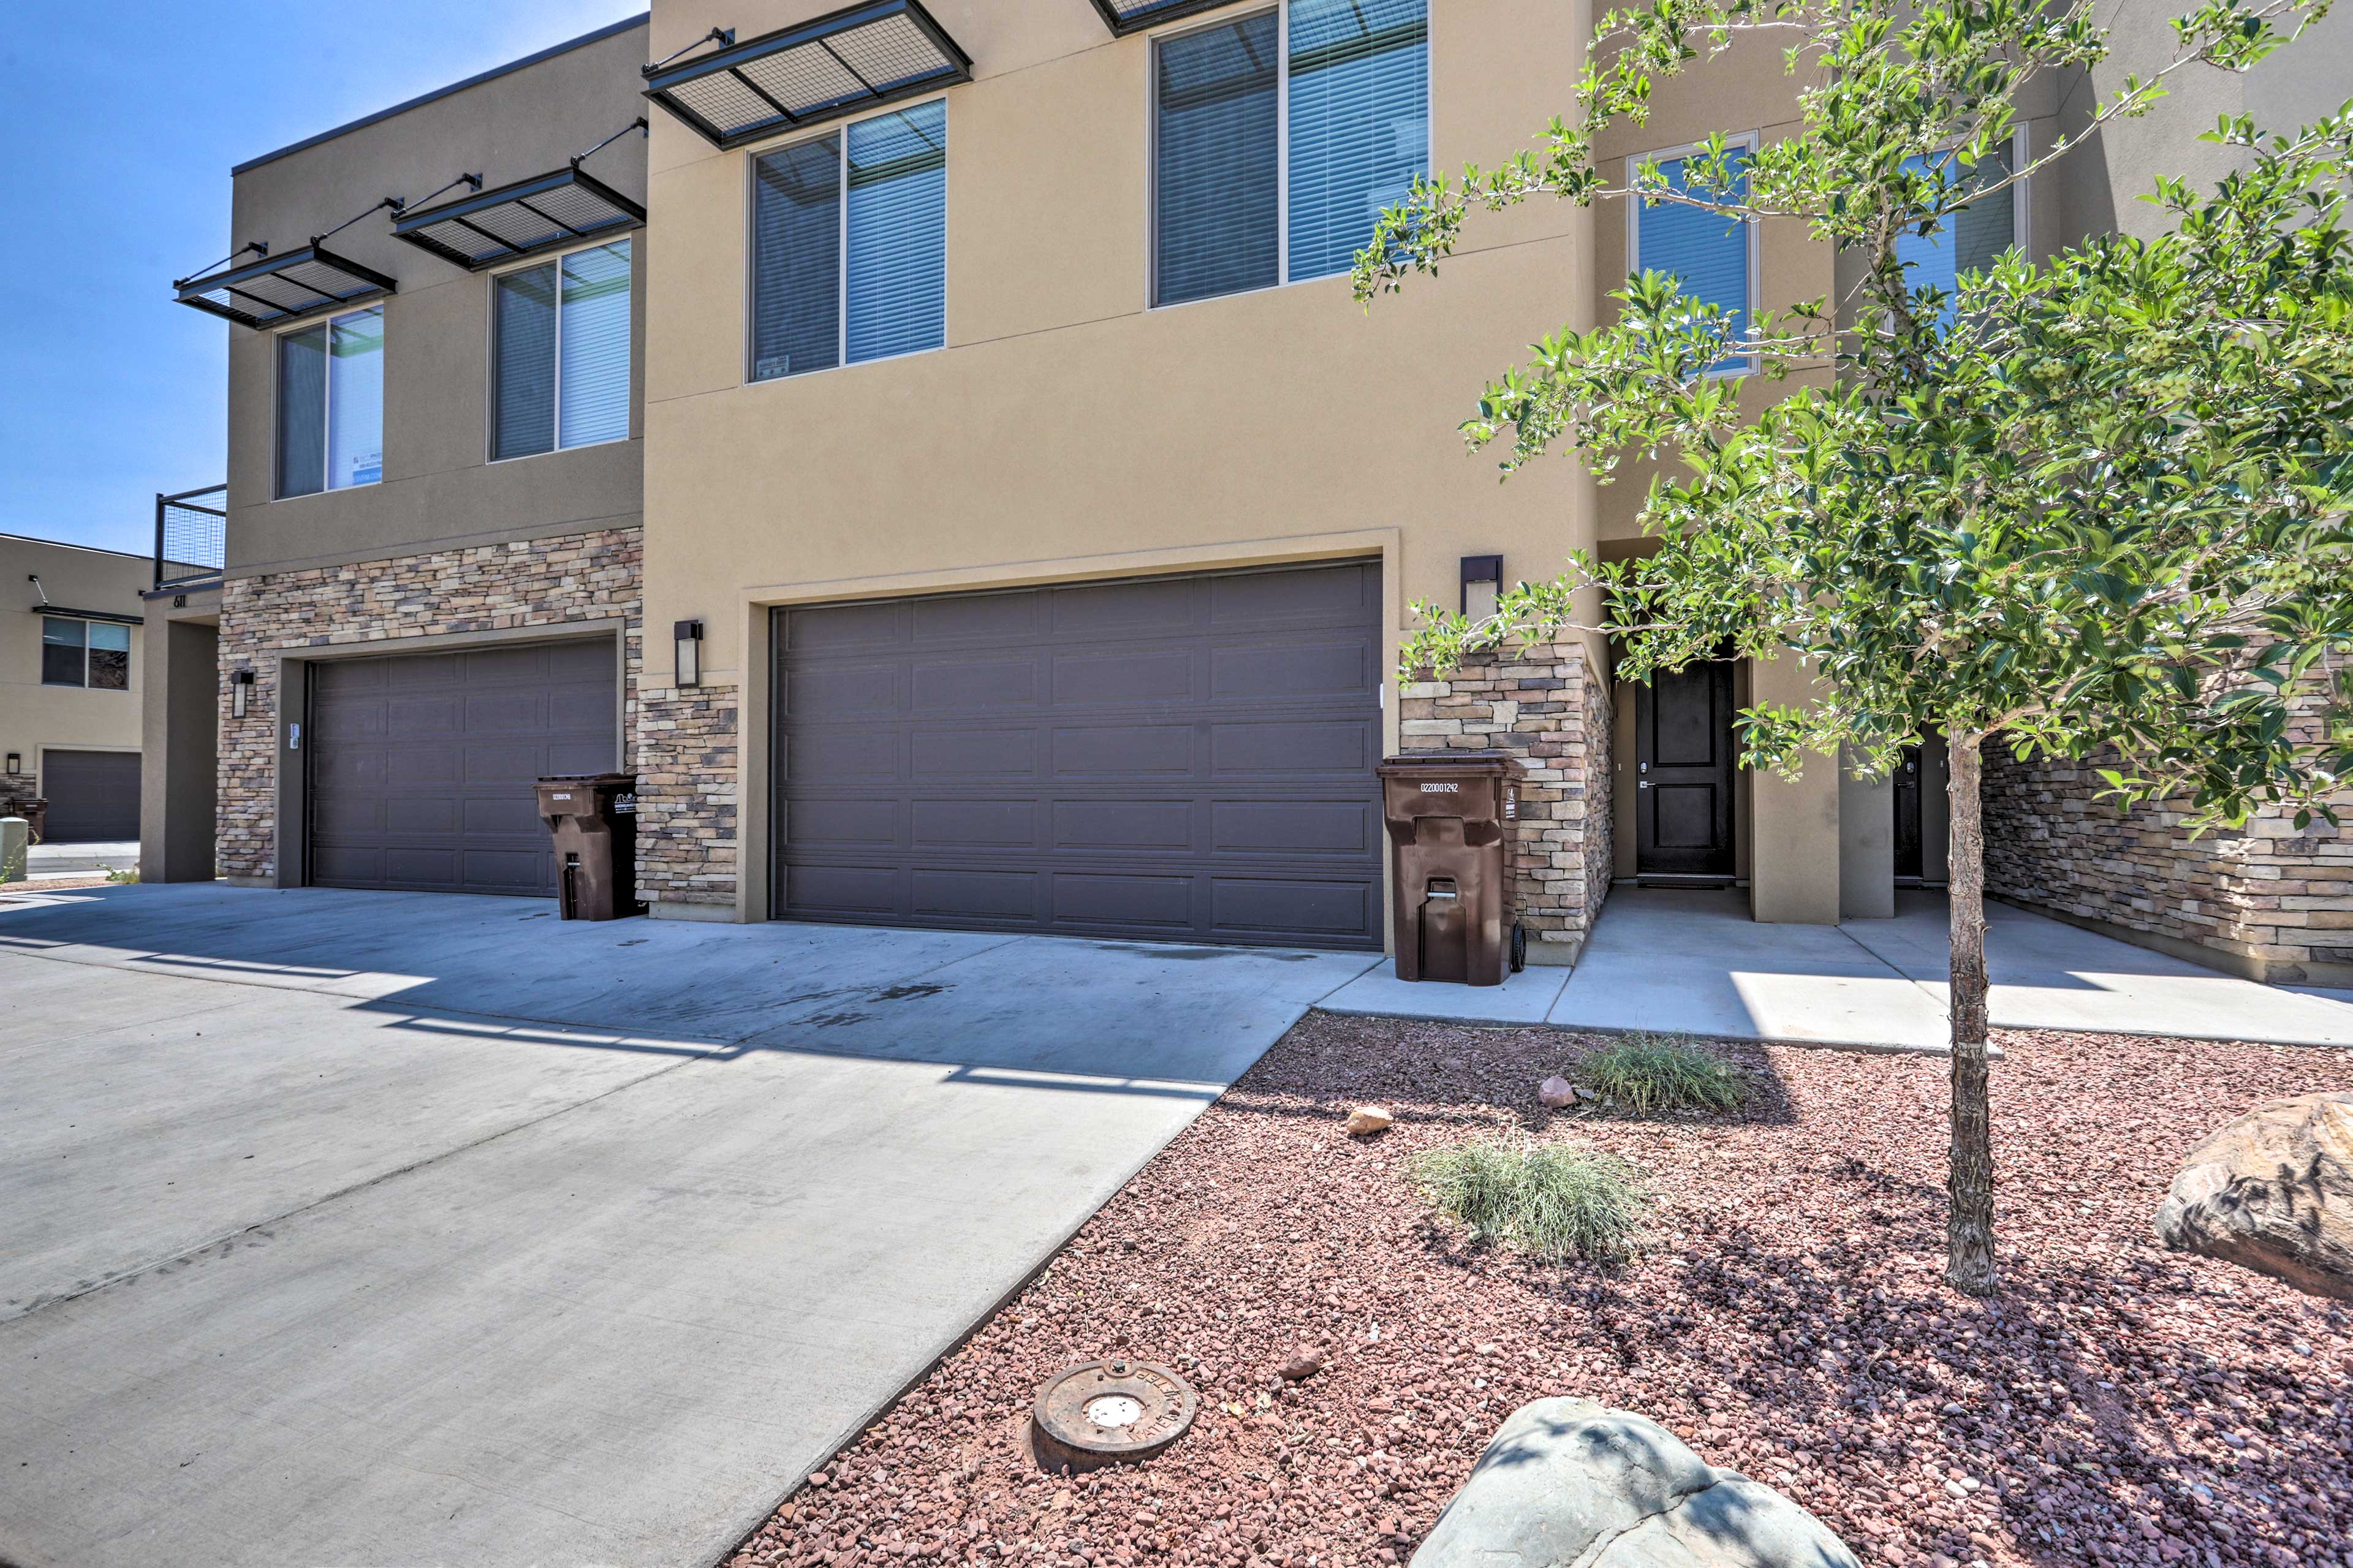 Come visit this stunning 4-bedroom, 3-bathroom townhome in central Moab!